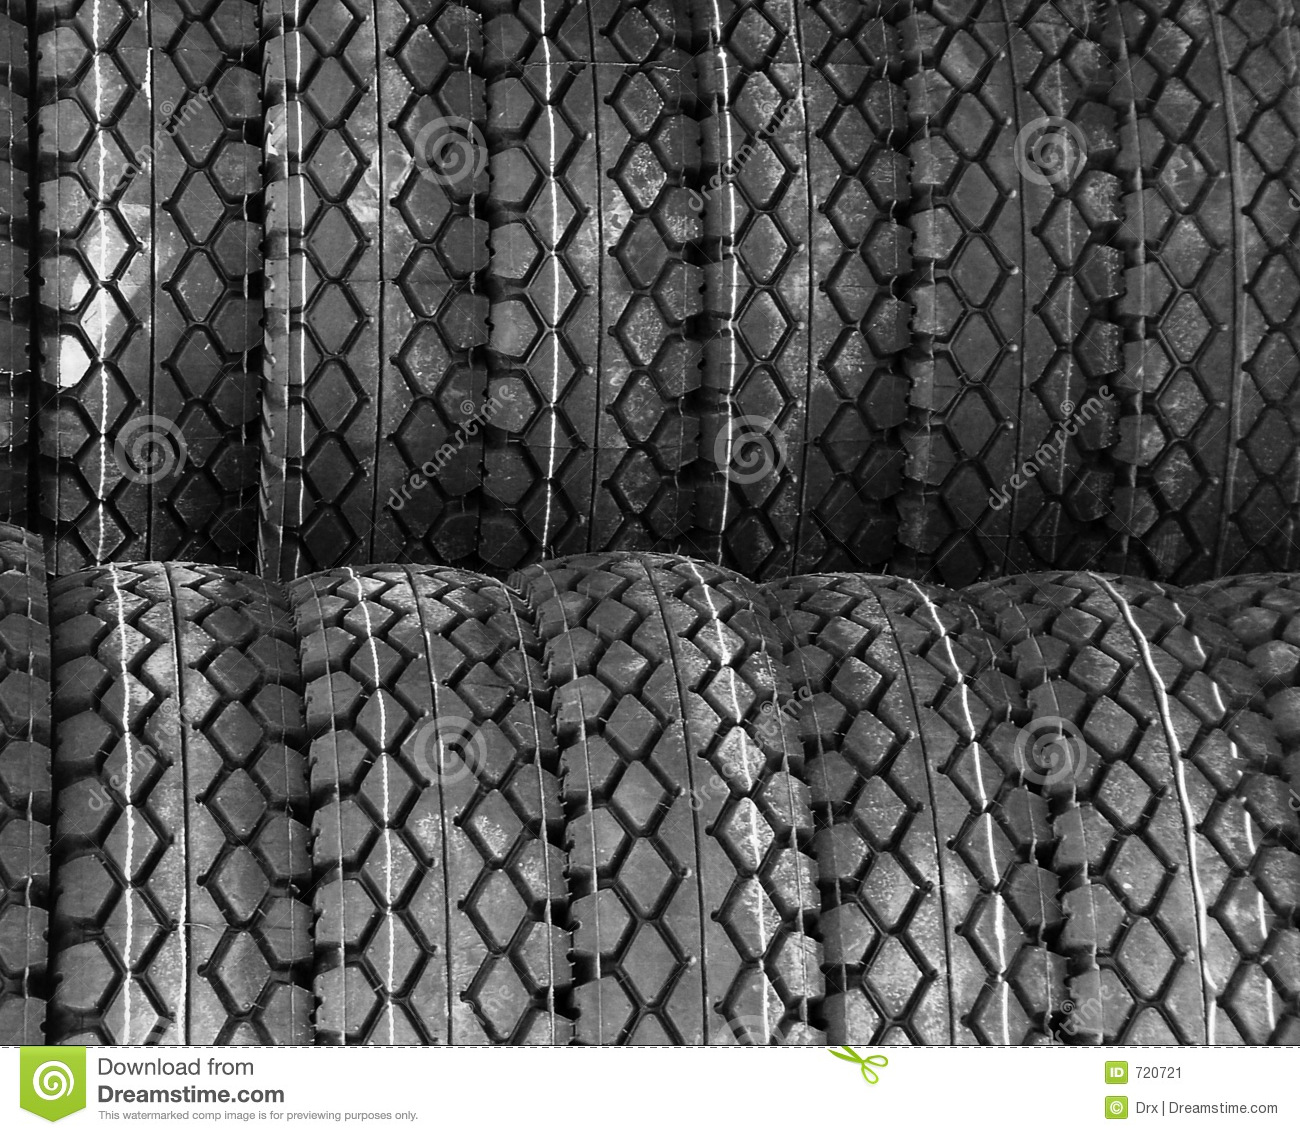 Tires Stock Image   Image  720721